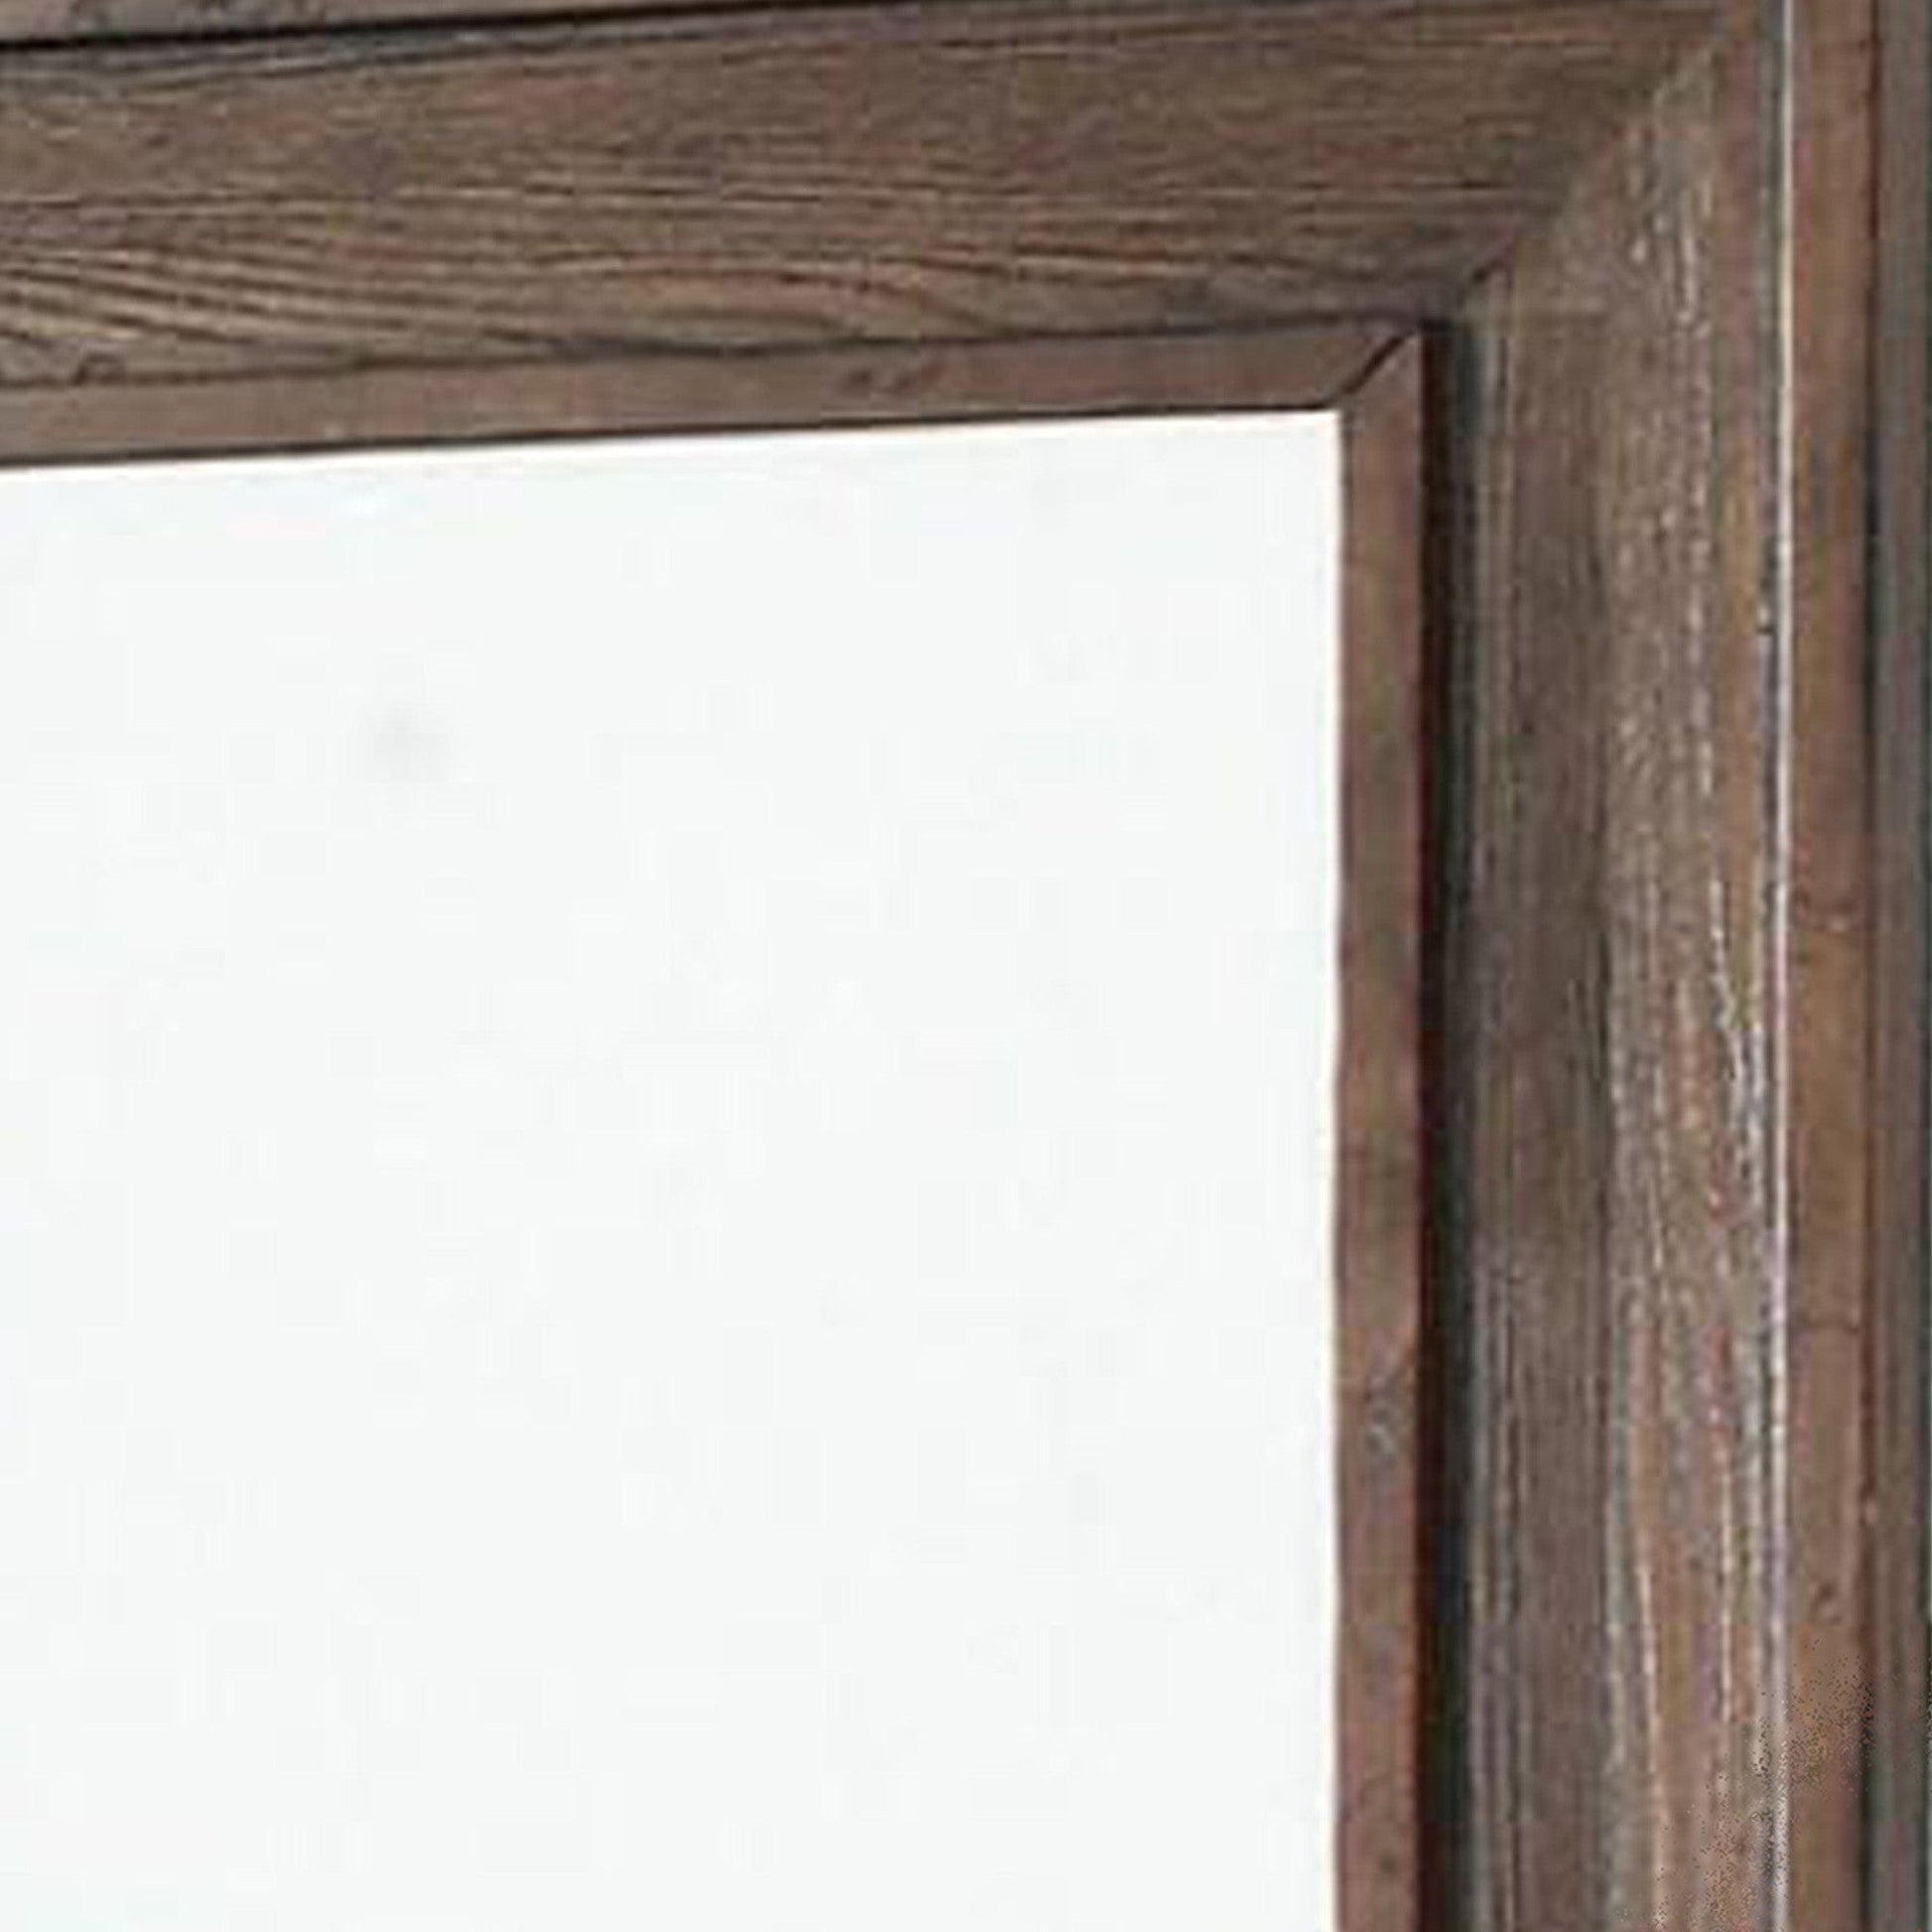 Benzara Brown Wooden Frame Mirror With Raised Edges and Grain Details